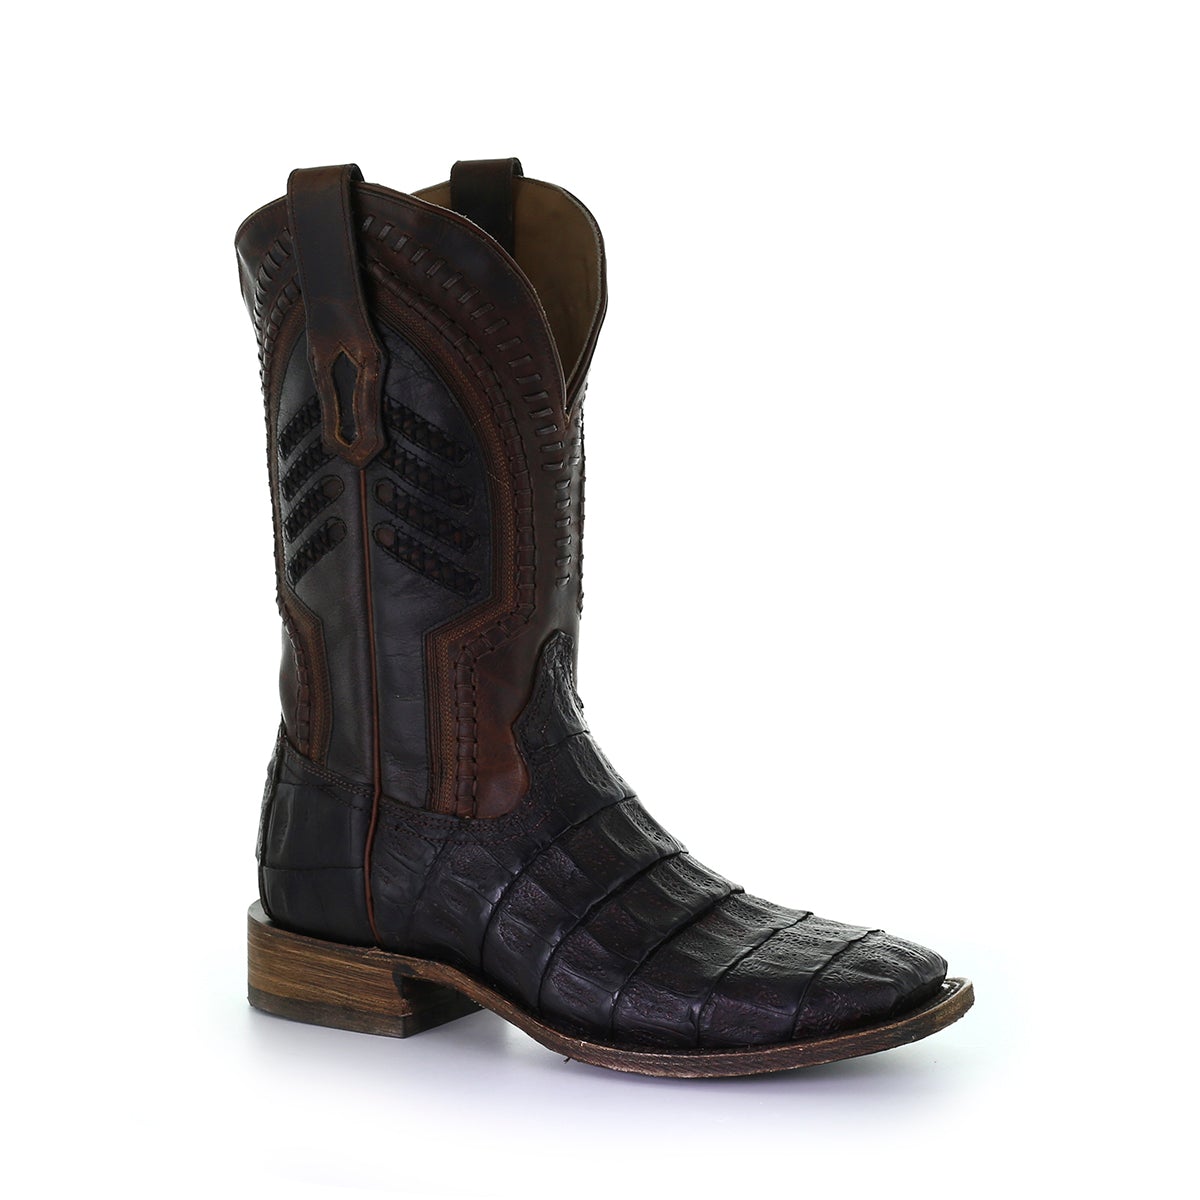 A3878 - MN OIL BROWN CAIMAN EMBROIDERY & WOVEN SHAFT SQ. TOE-kuet